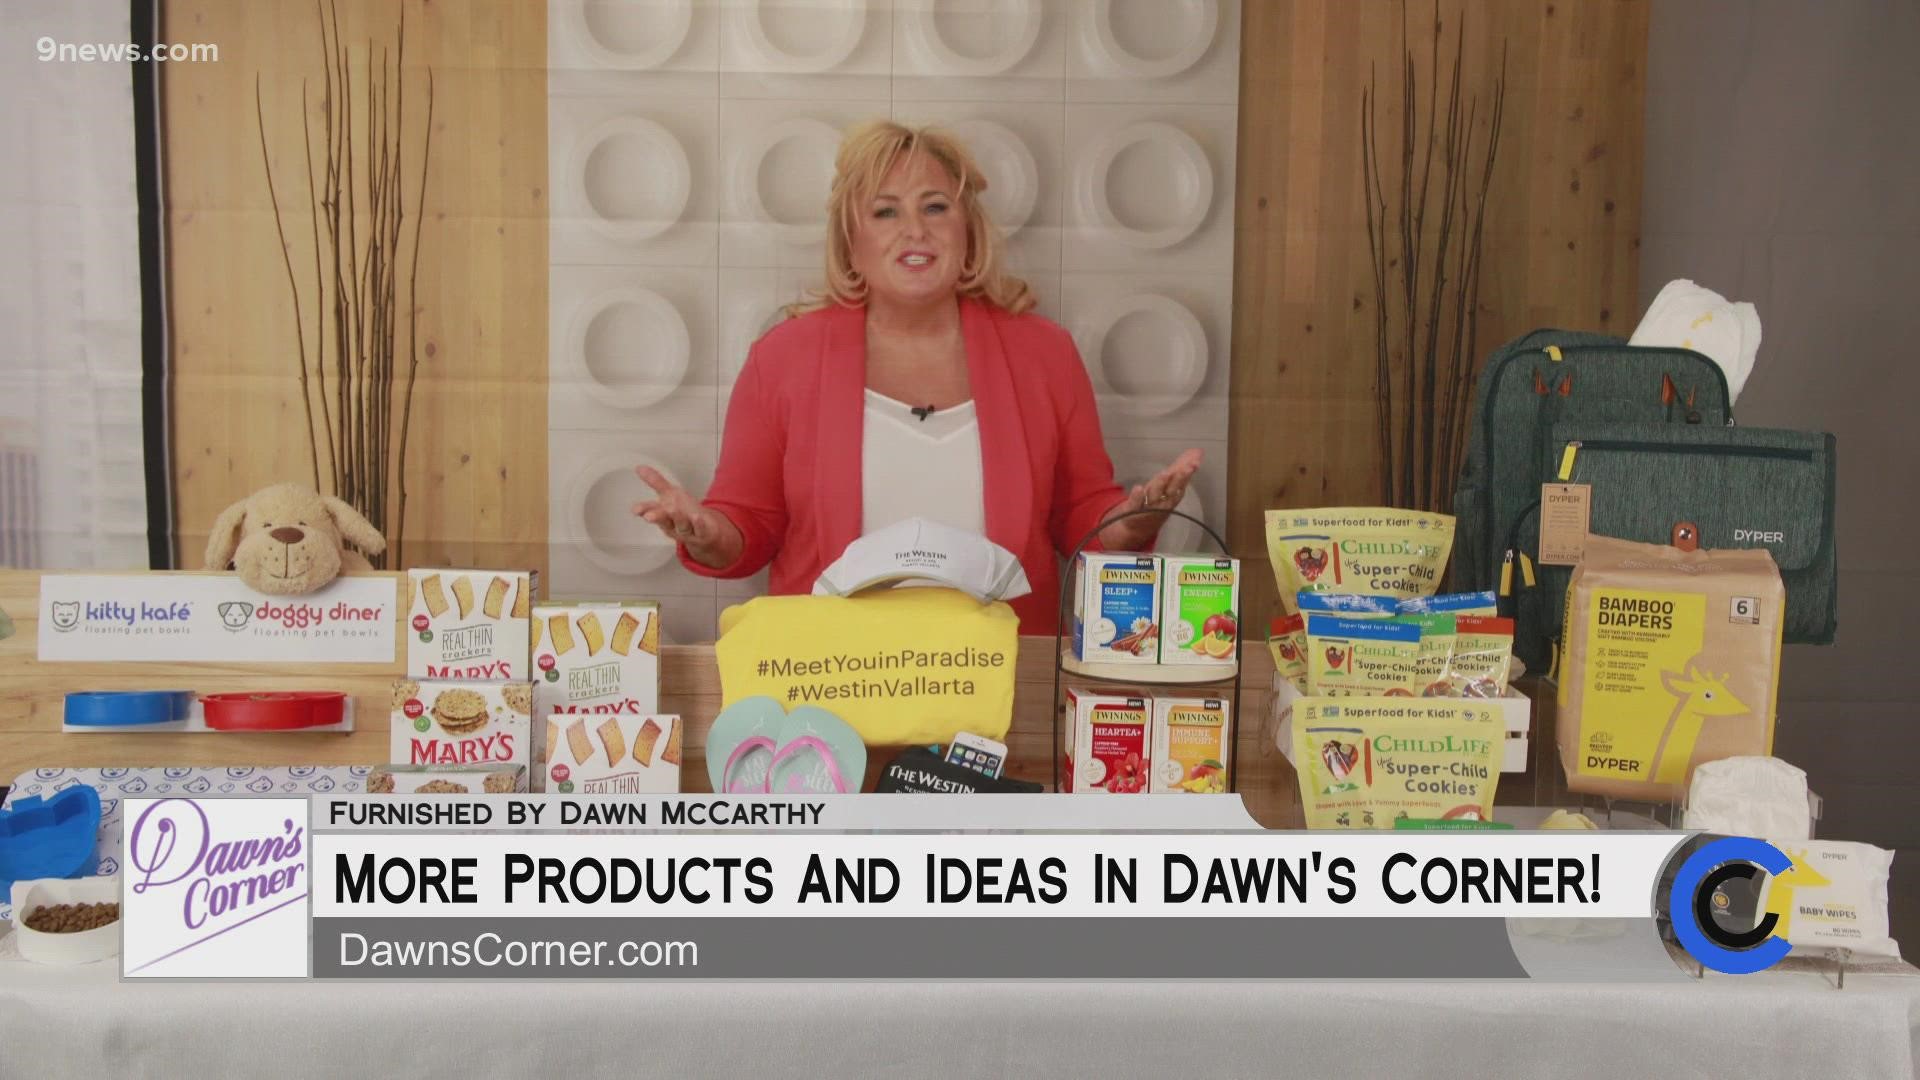 Visit DawnsCorner.com to learn more about these products and more. **PAID CONTENT**